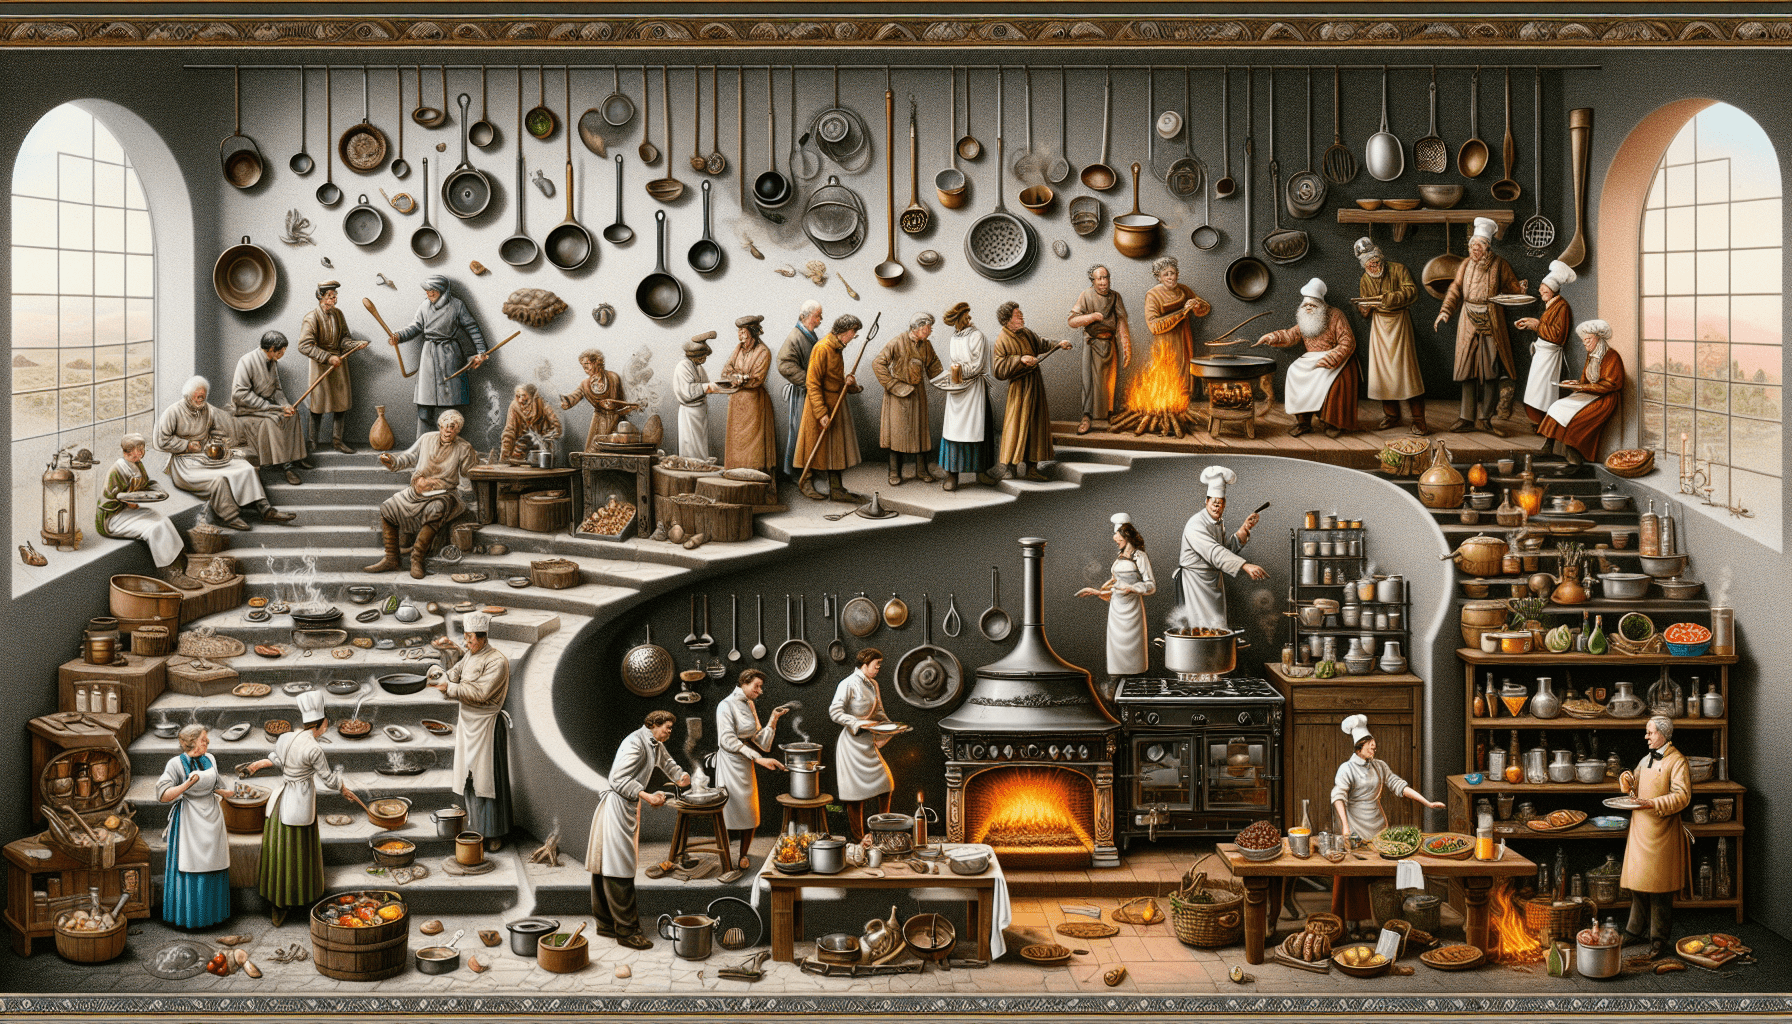 How Has Cooking Evolved From Past To Present?